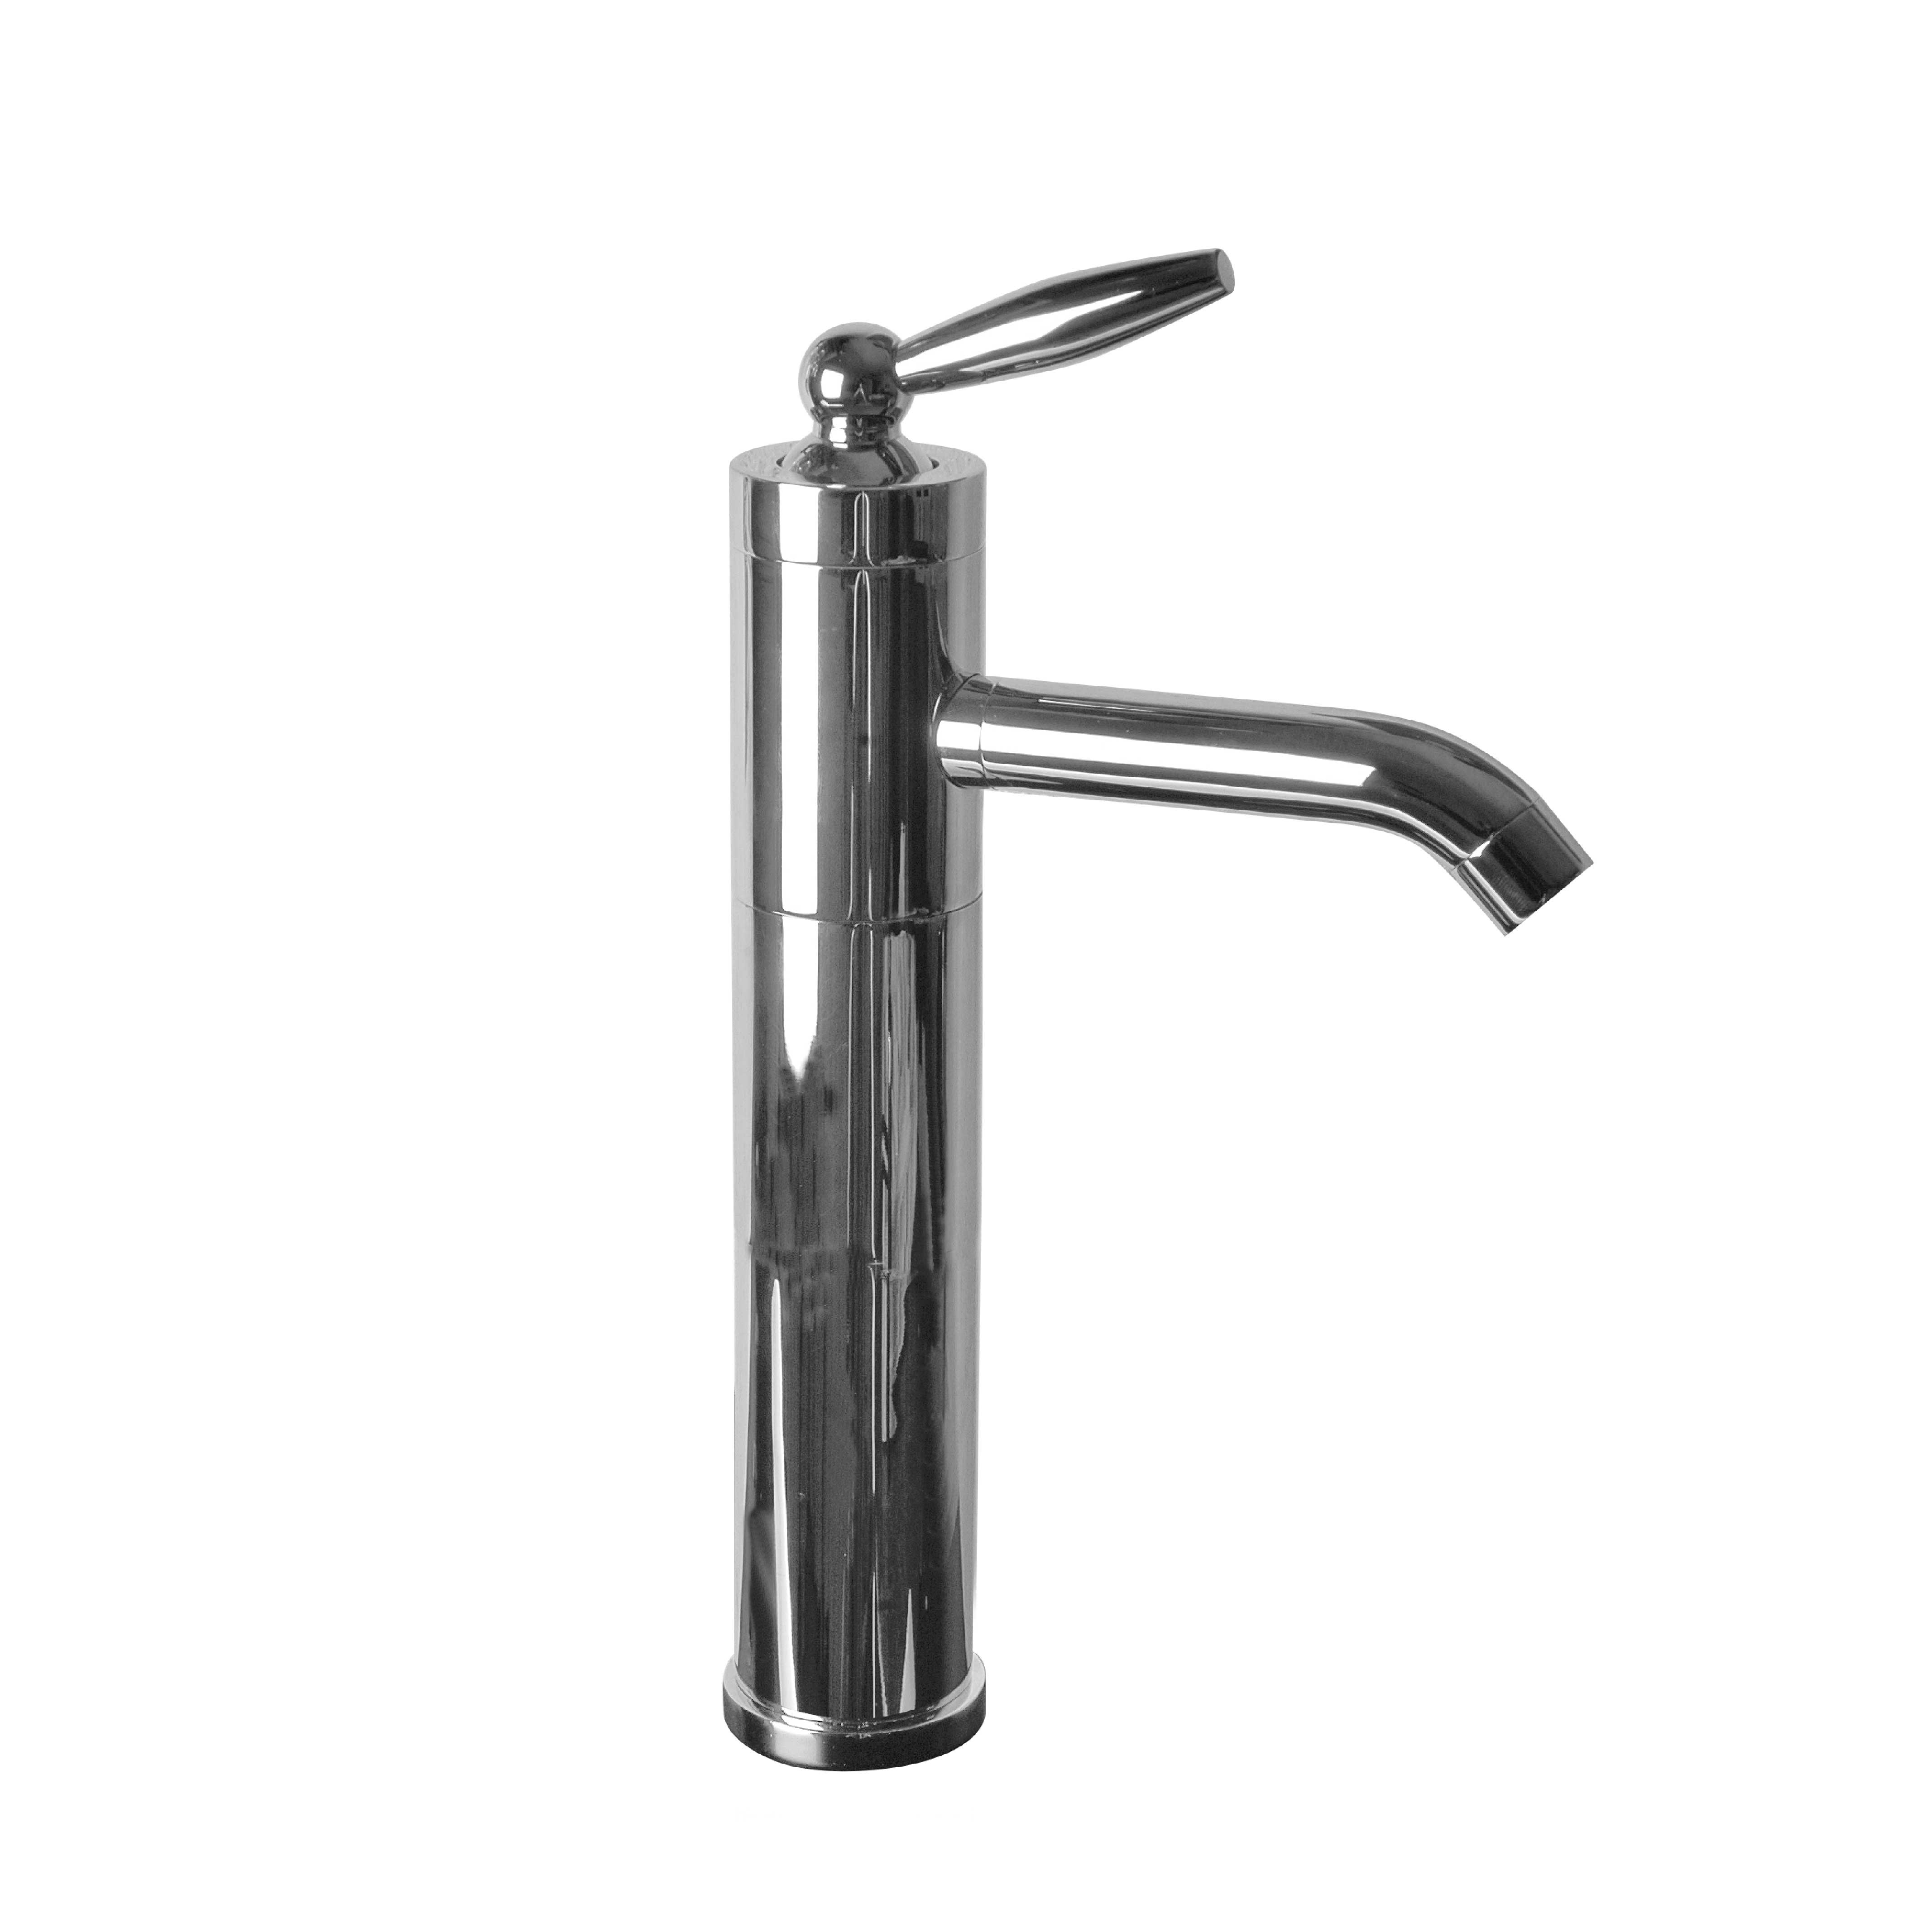 M50-1101MB Heightened lever basin mixer, H. 320mm